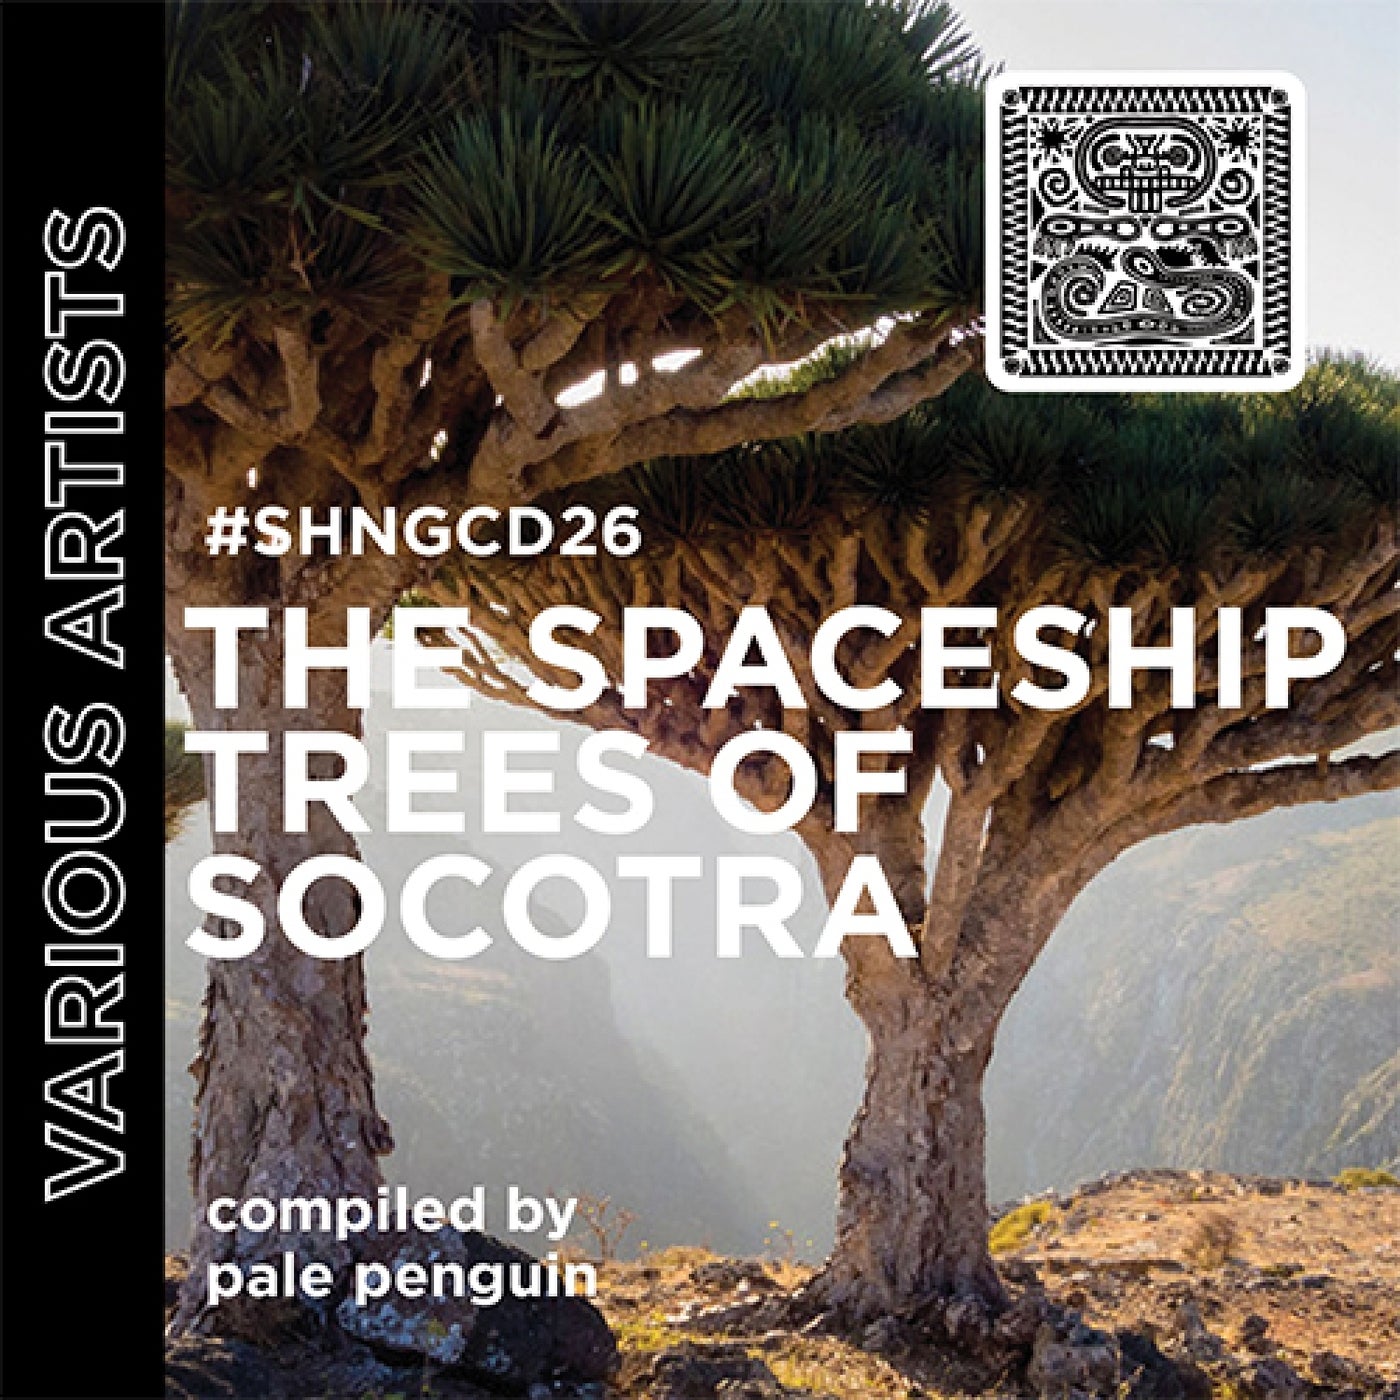 Sydney Seymour, Aman Dava – The Spaceship Trees Of Socotra compiled by Pale Penguin [SHNGCD26]